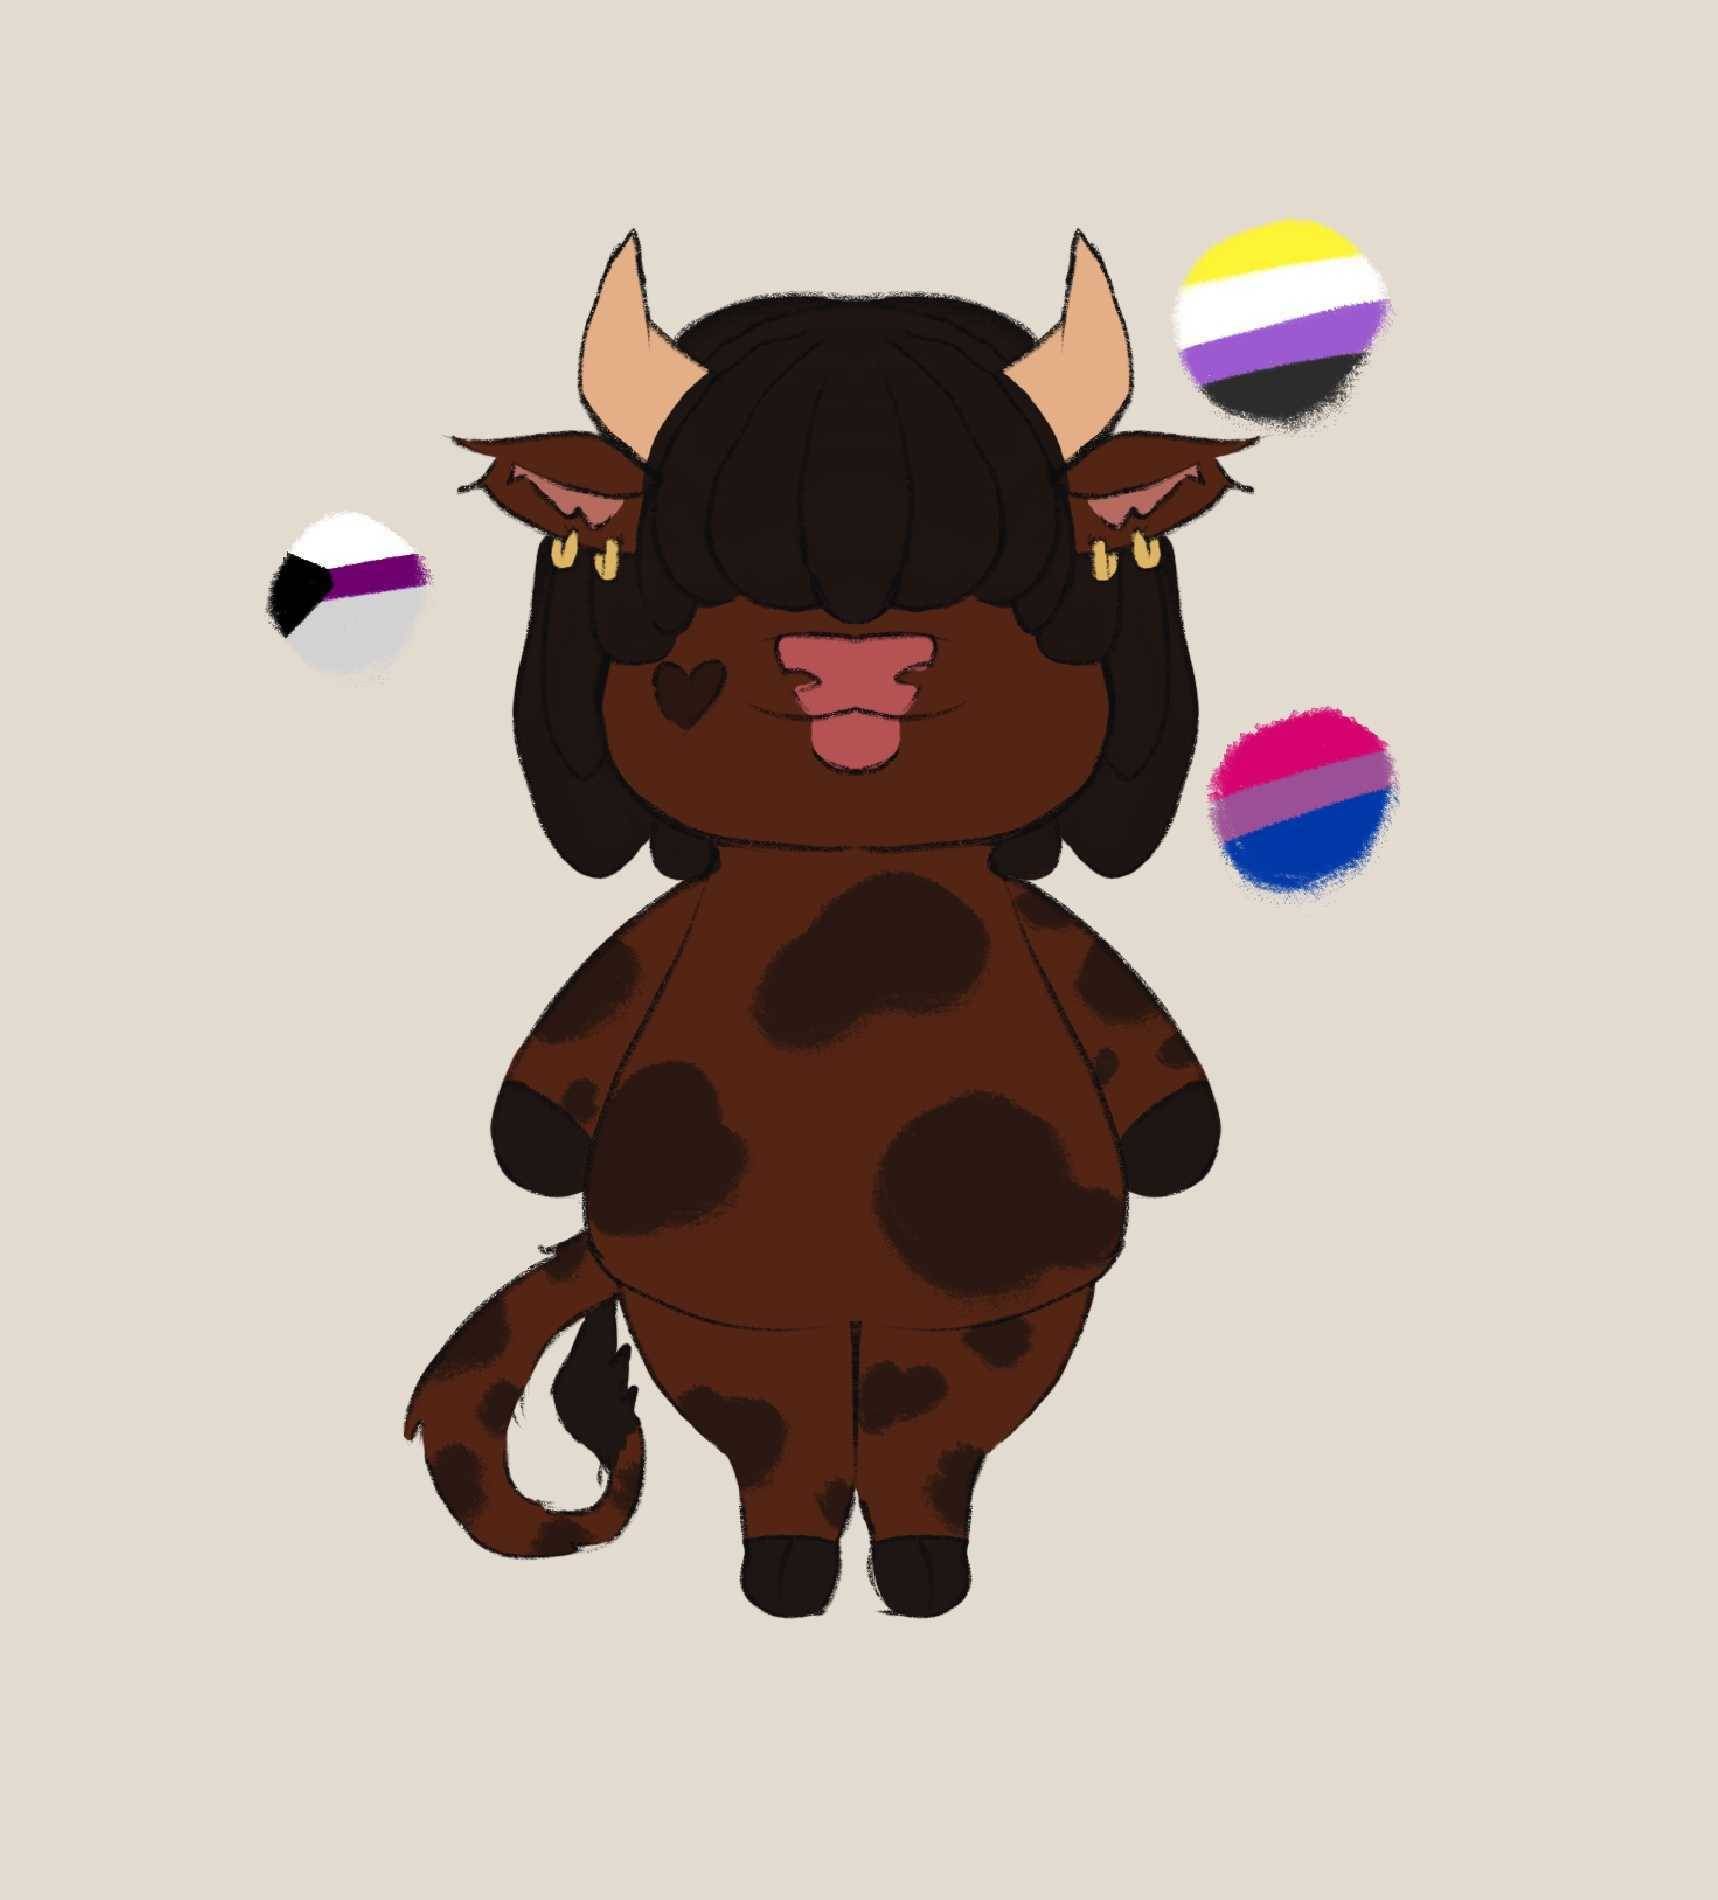 A brown cow with tall horns, black bangs cover it's eyes, a heart shape mark on it's cheek and with dark spots